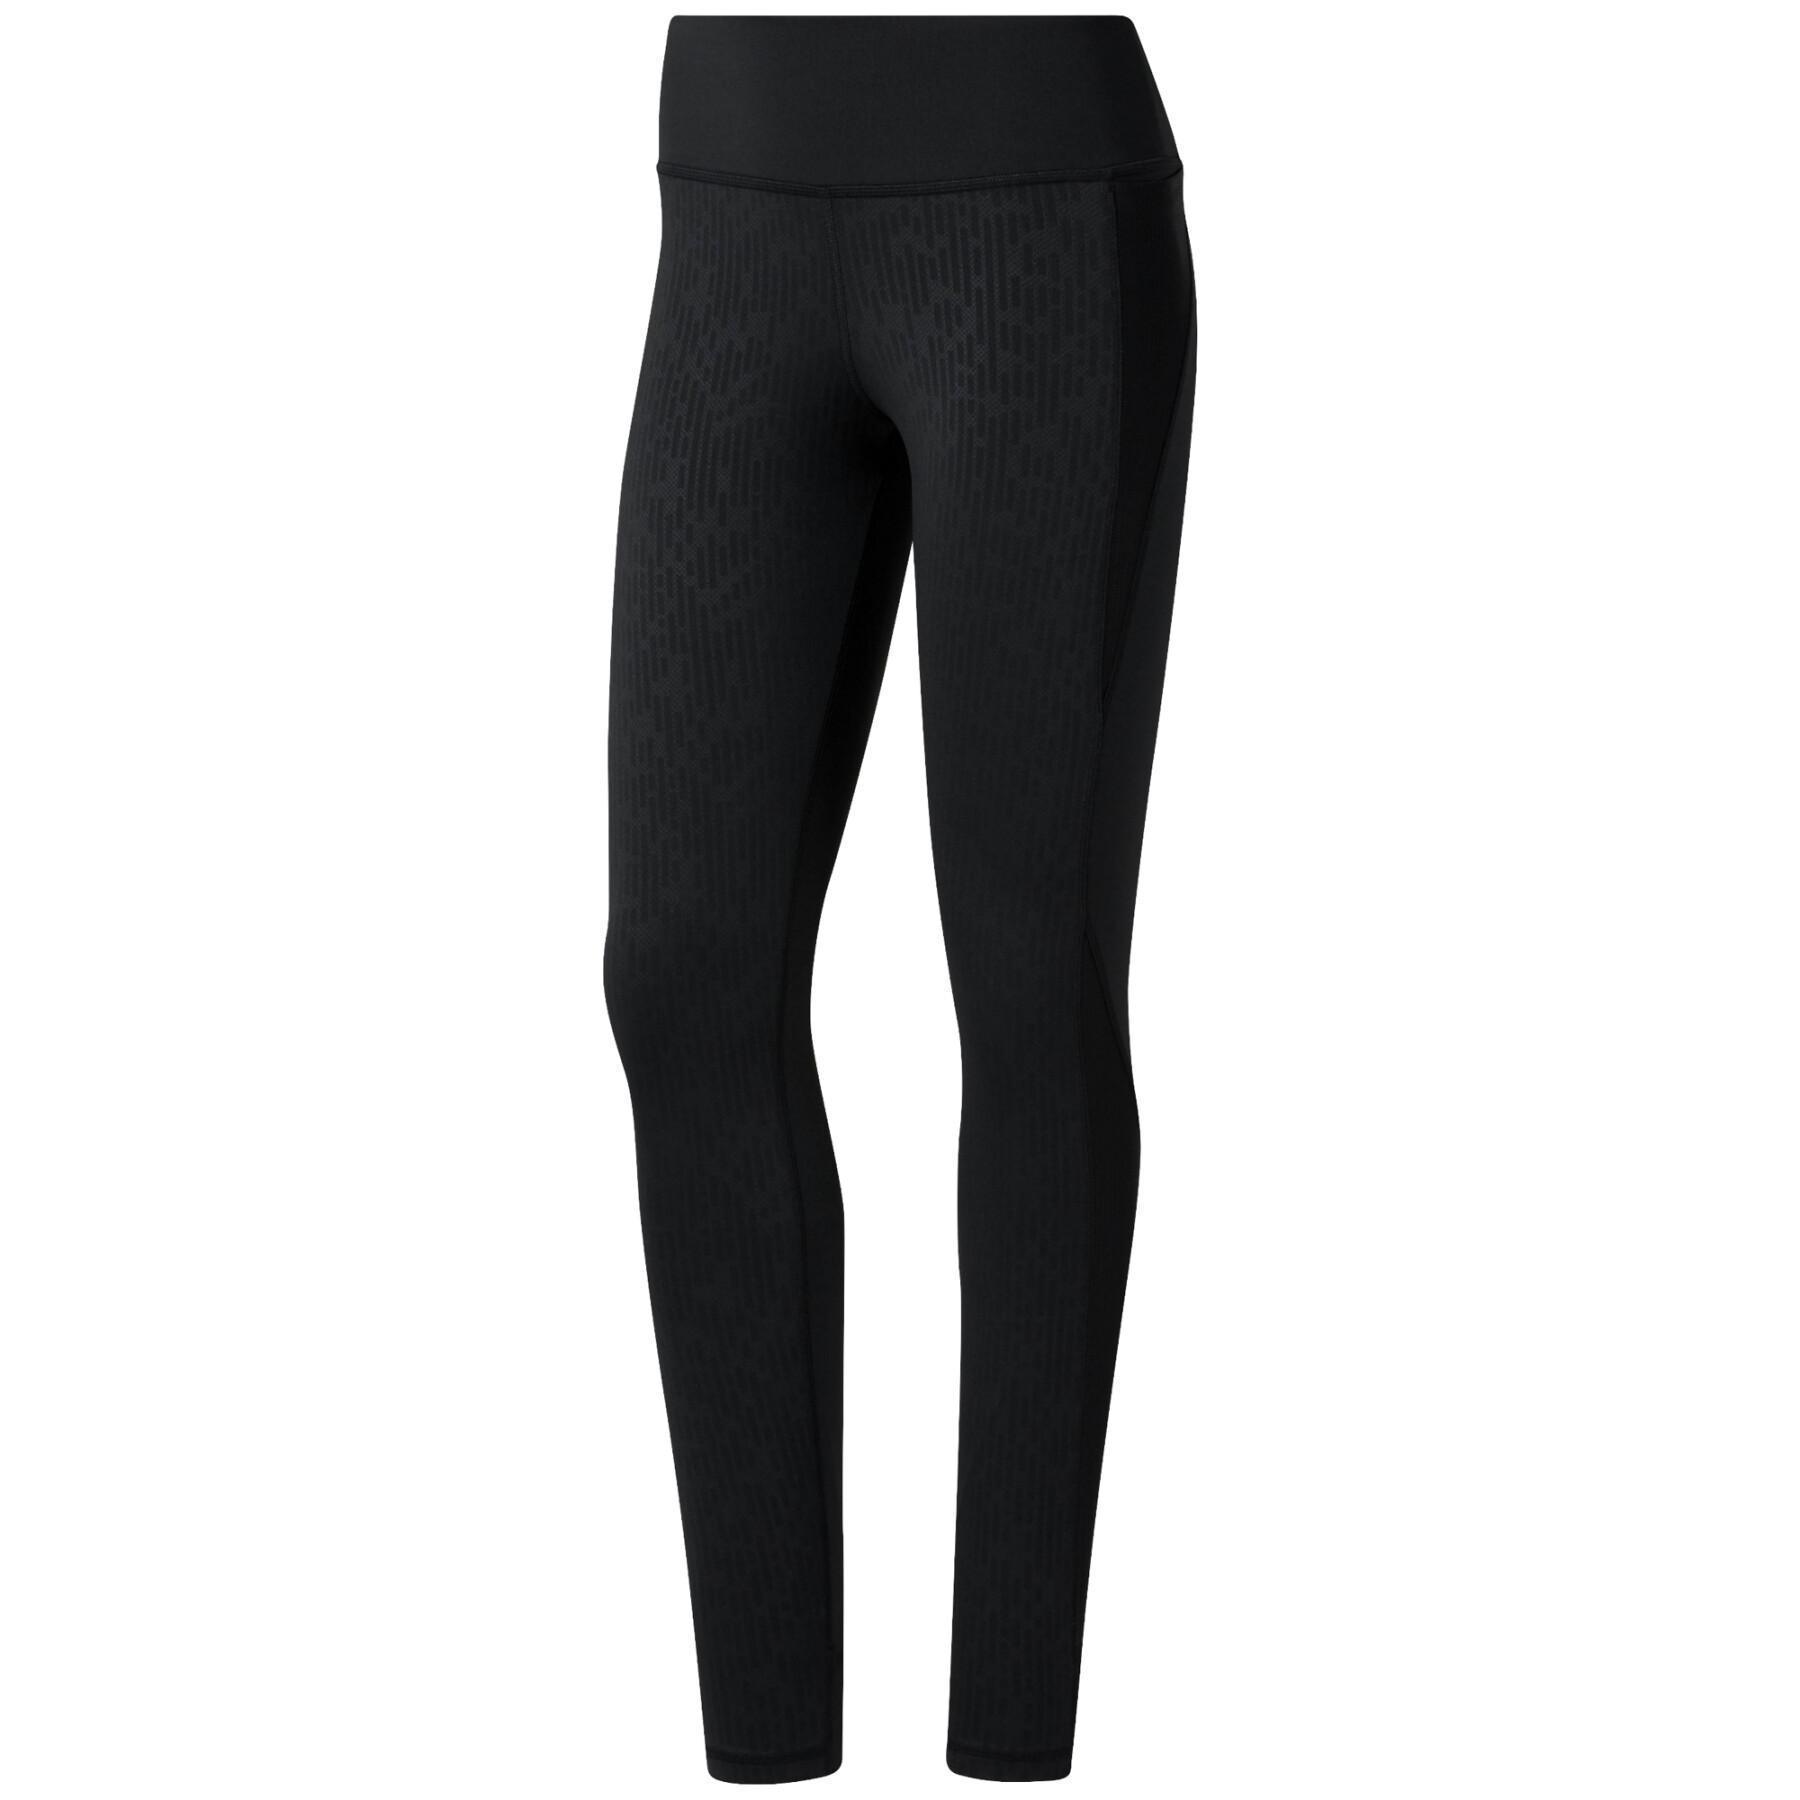 Tights Reebok Thermowarm Touch